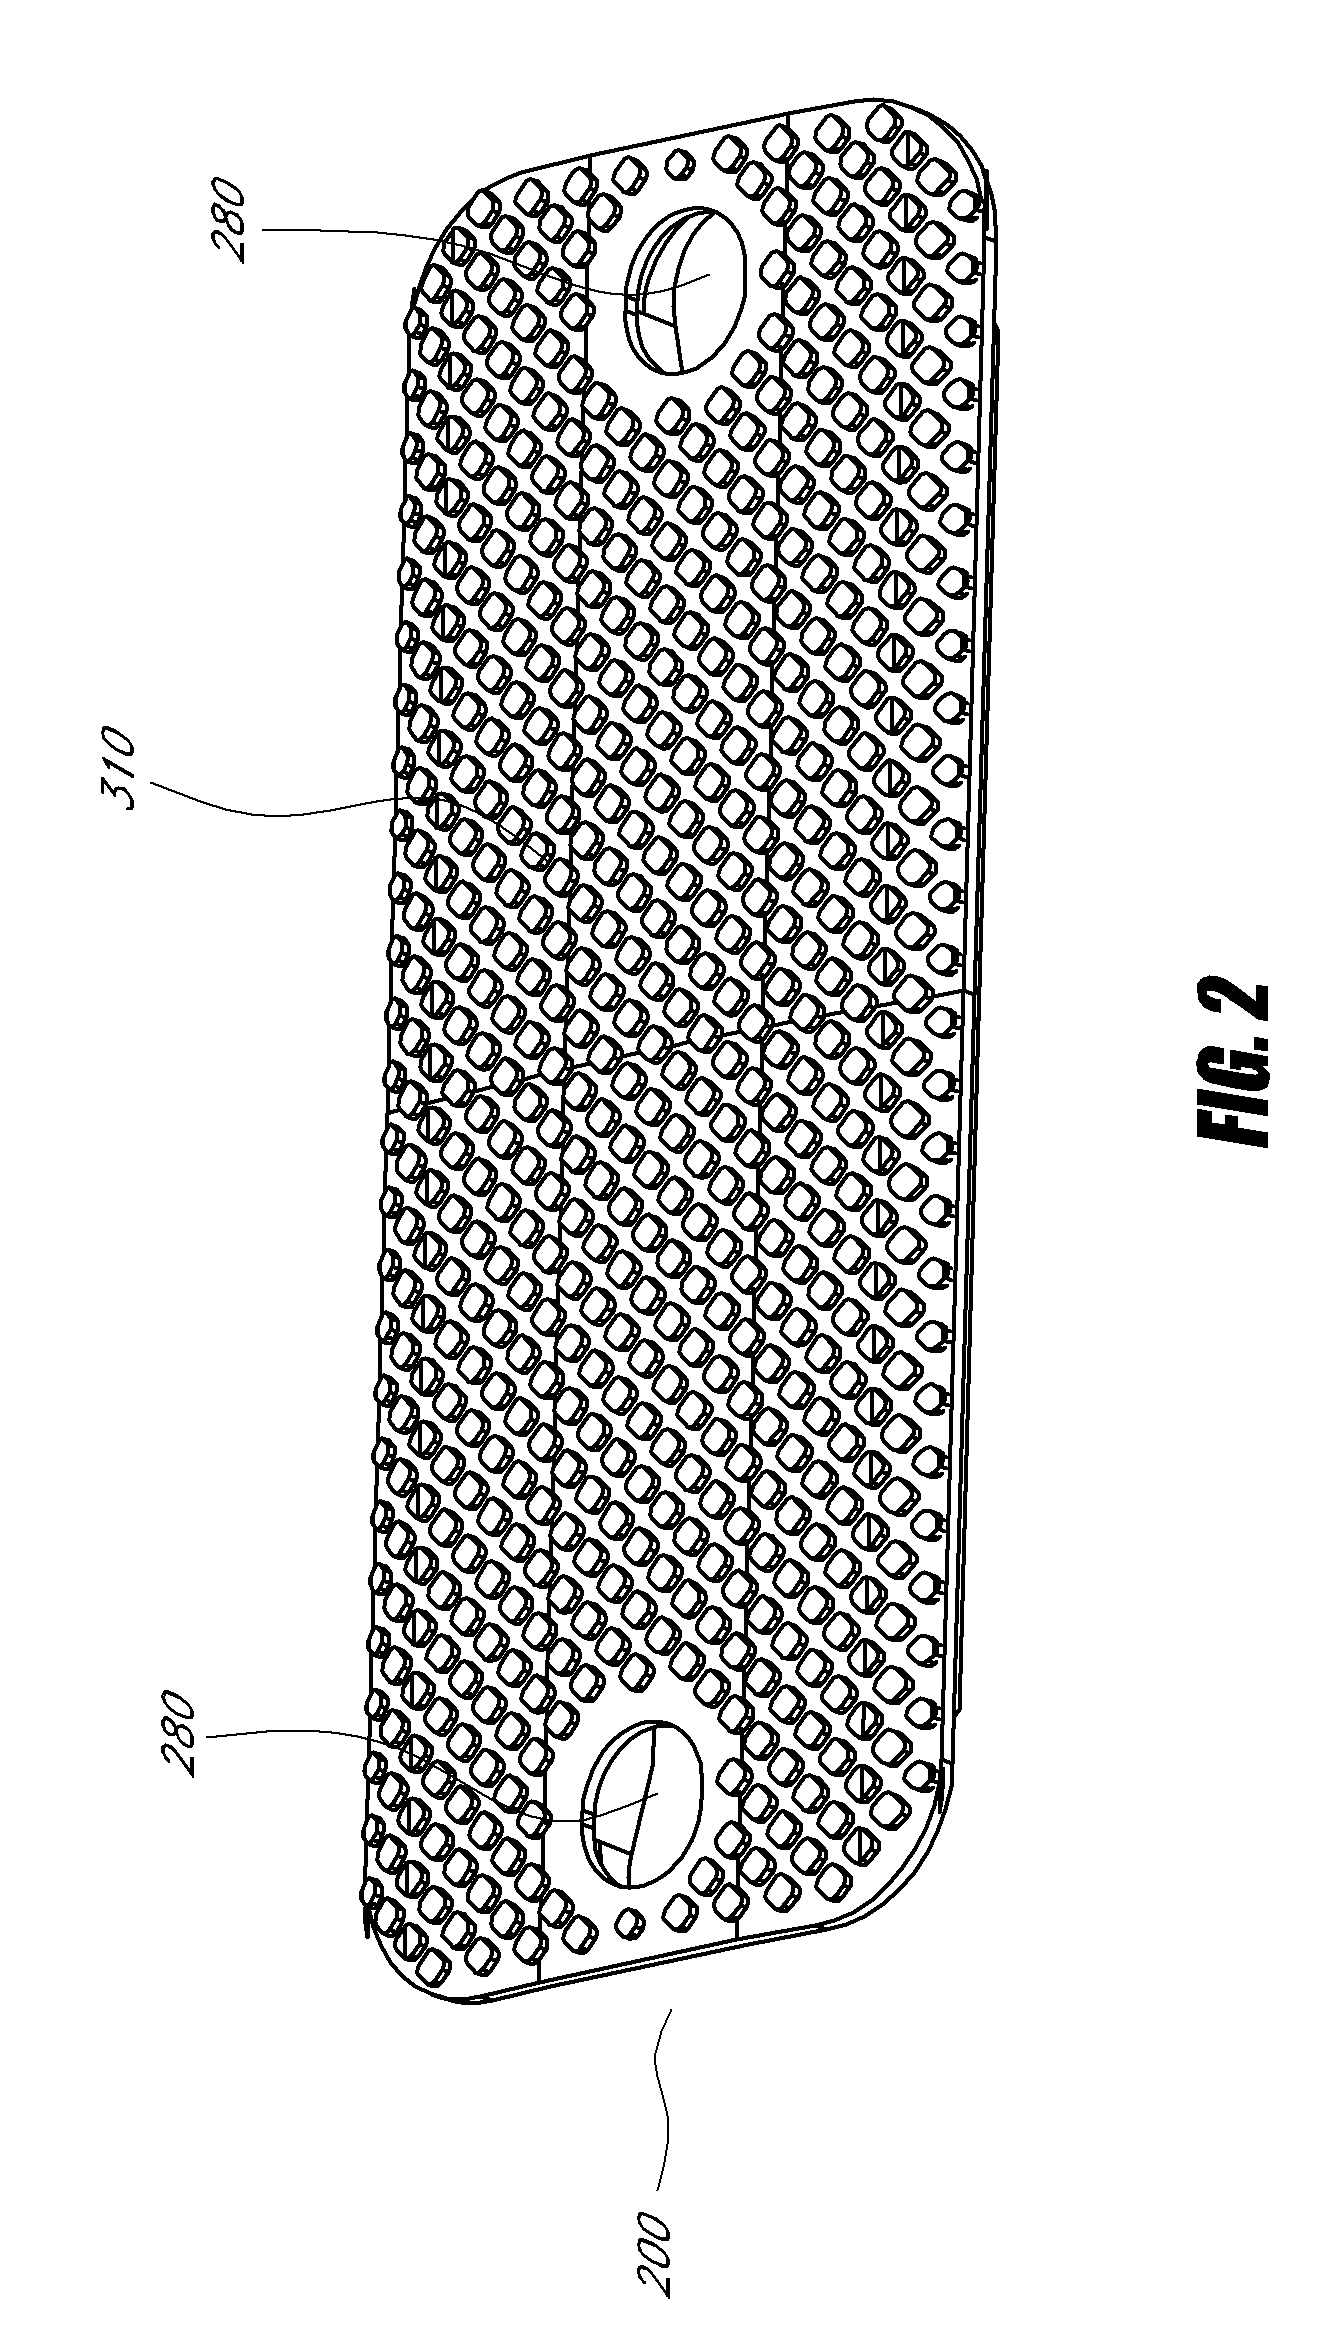 Apparatus for holding a cleaning sheet in a cleaning implement